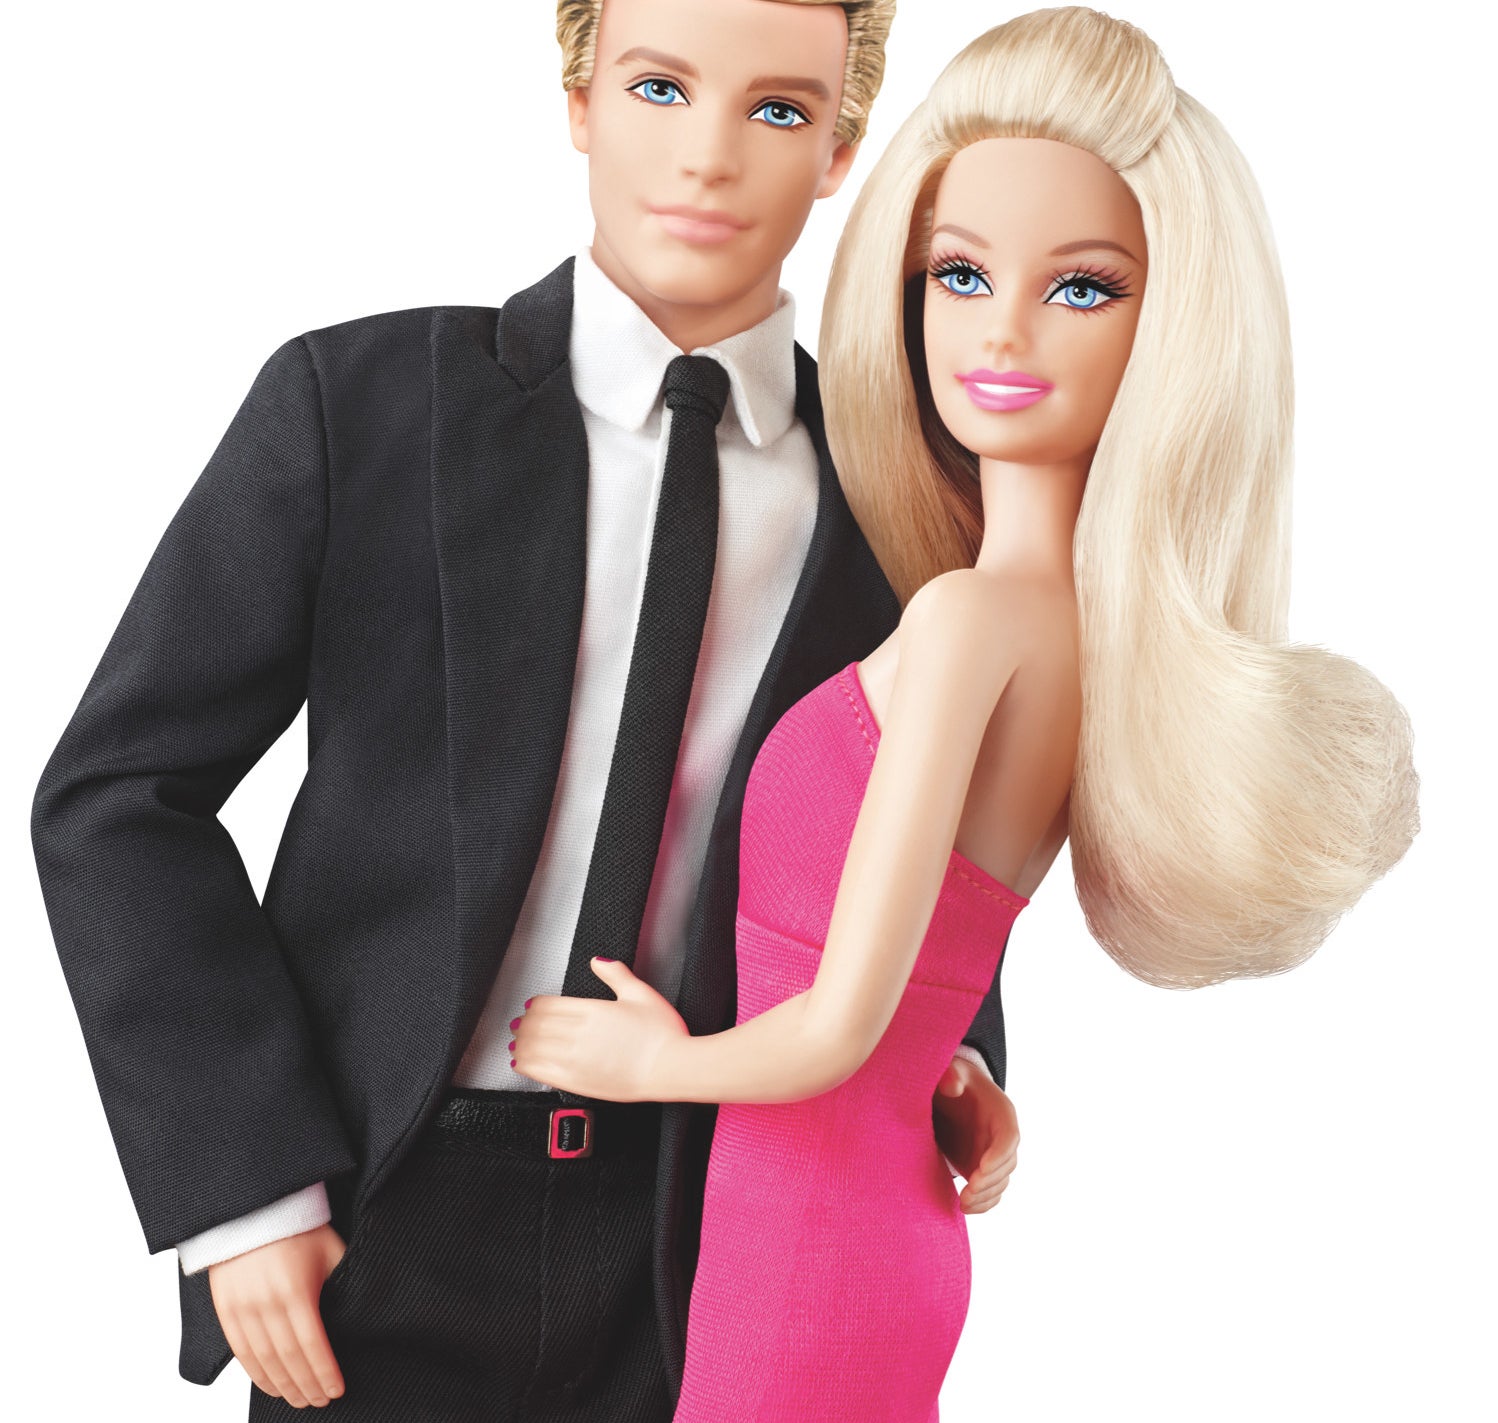 A Barbie and Ken from 2011